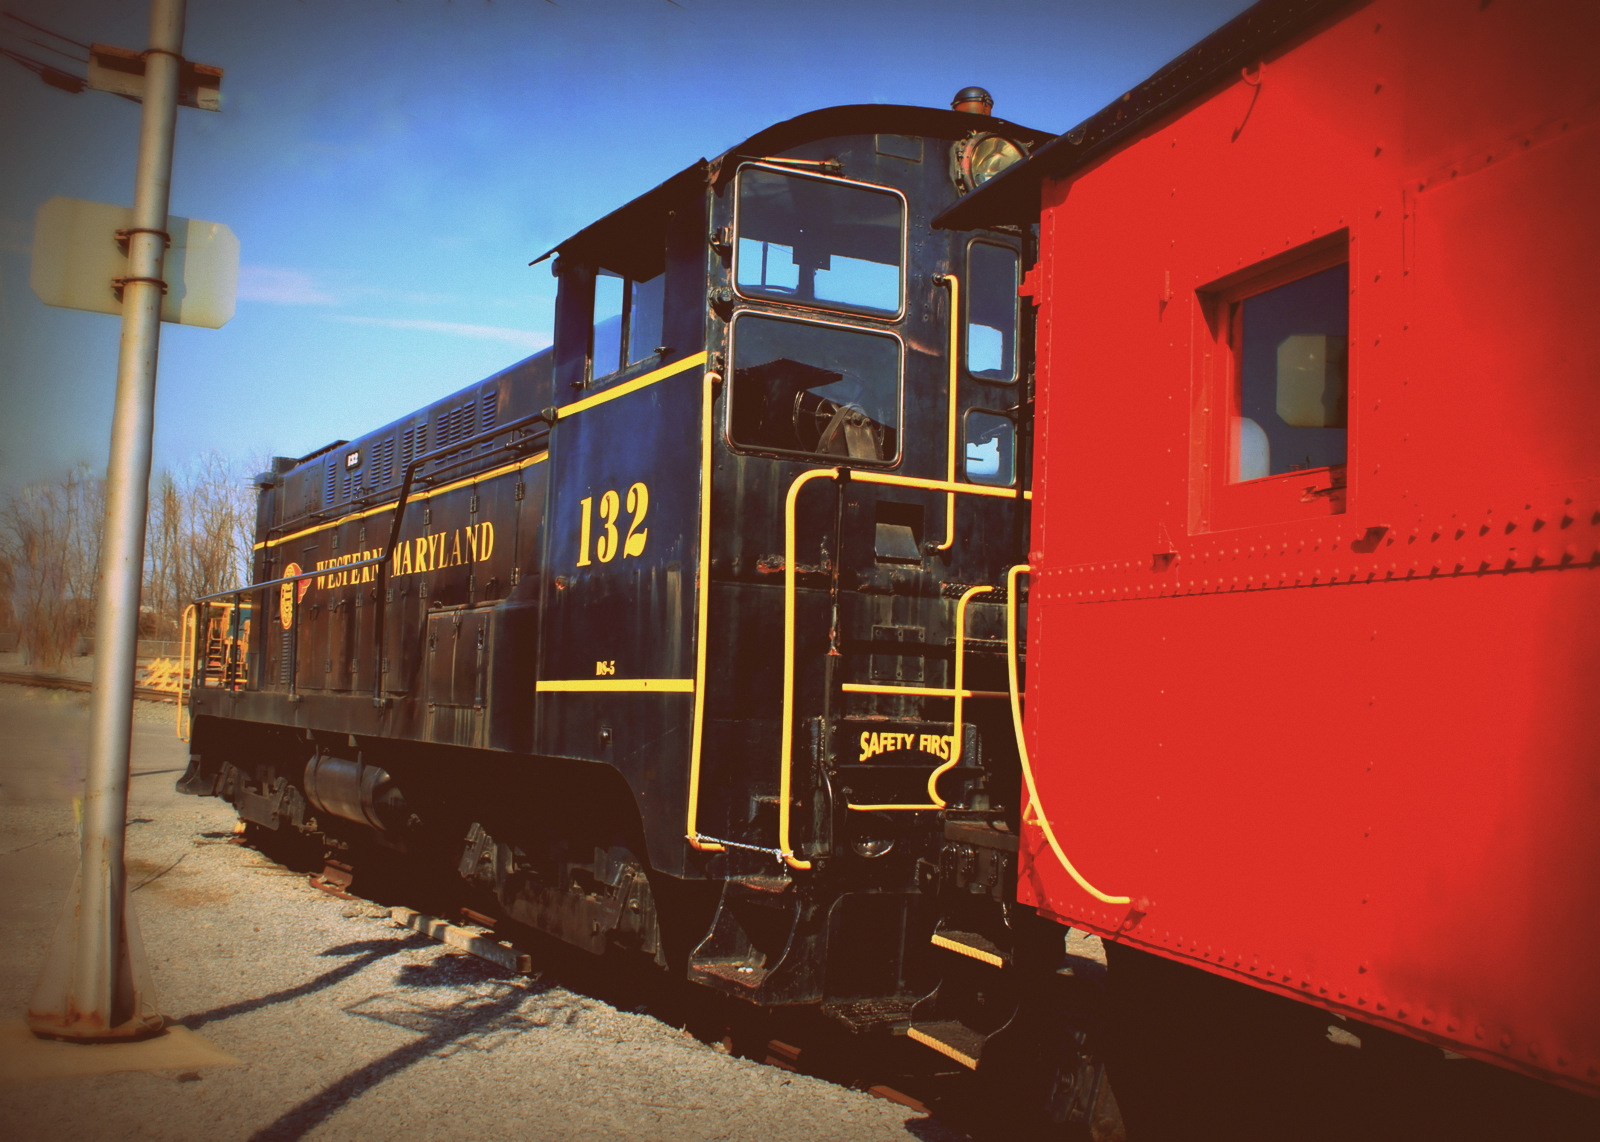 Diesel engine 132 and caboose rolling stock at the Hagerstown Roundhouse Museum, left back view.